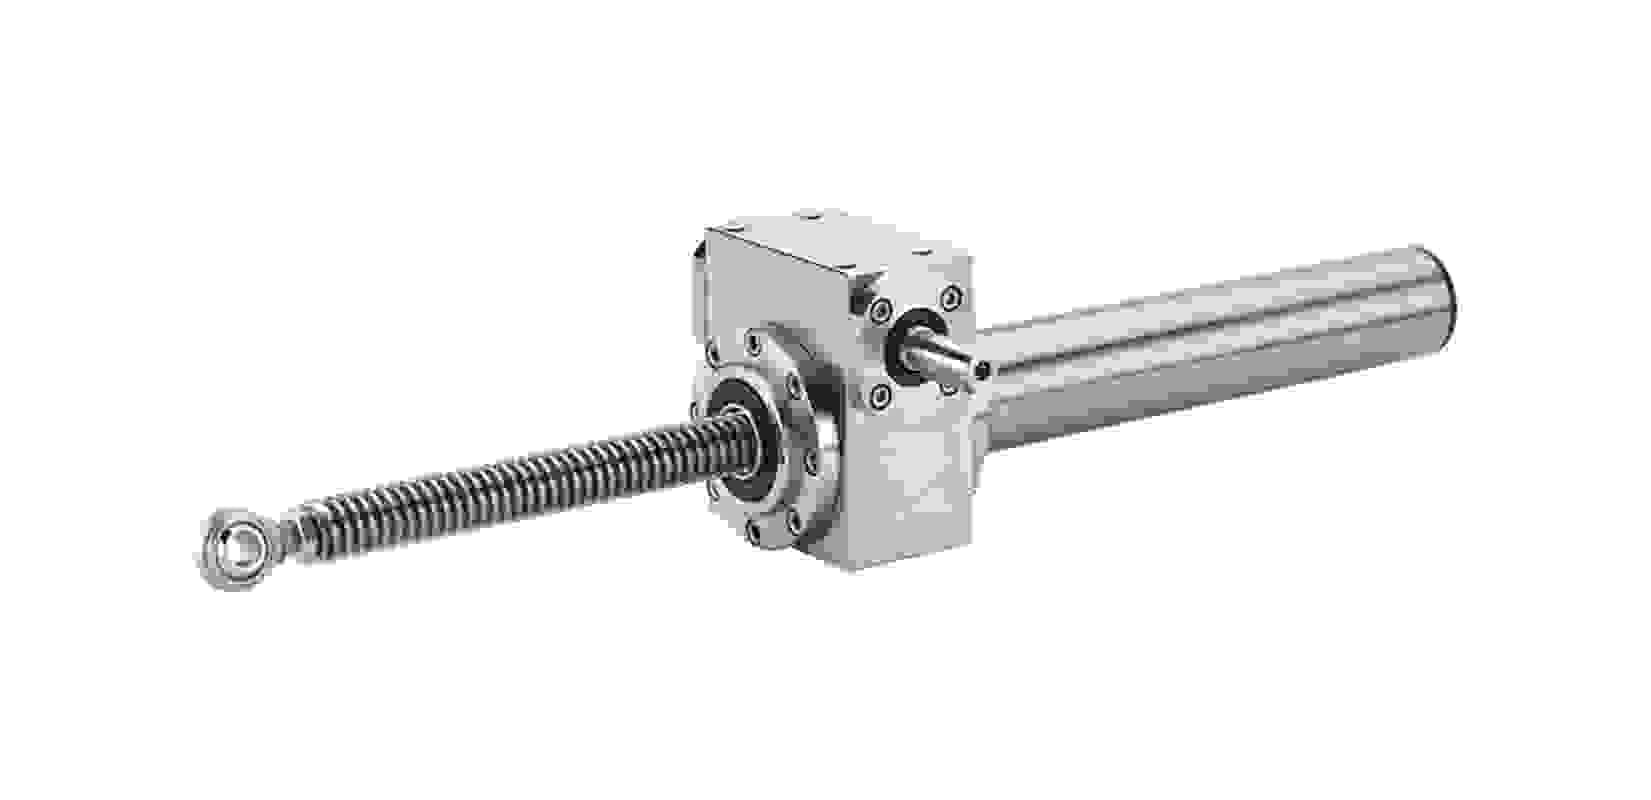 A worm gear screw jack with rotating ball screw spindle on transparent background